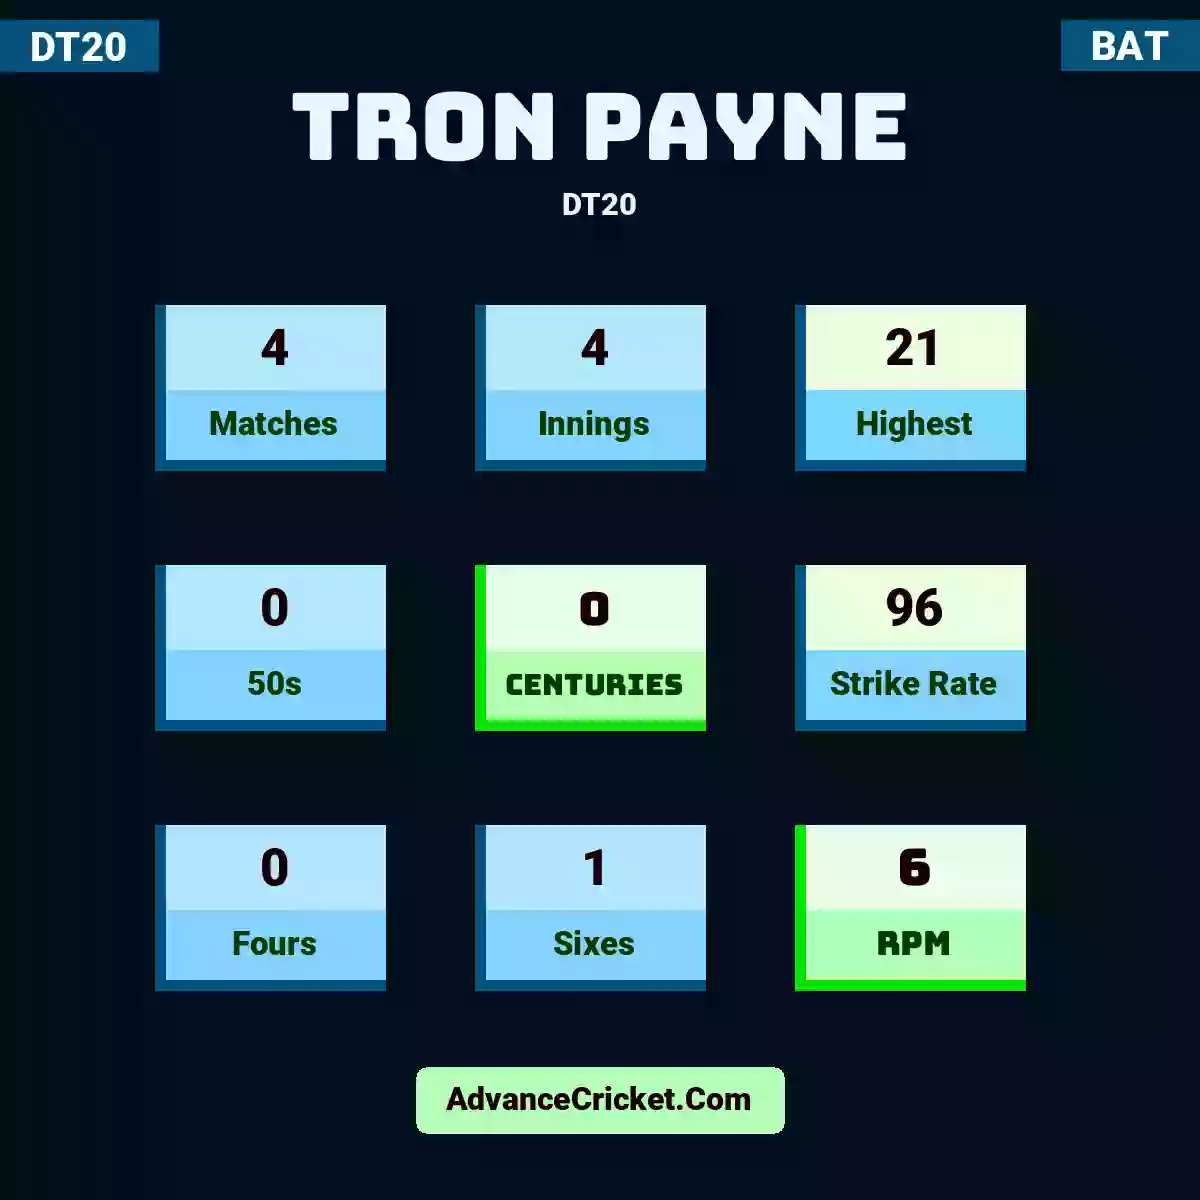 Tron Payne DT20 , Tron Payne played 4 matches, scored 21 runs as highest, 0 half-centuries, and 0 centuries, with a strike rate of 96. T.Payne hit 0 fours and 1 sixes, with an RPM of 6.